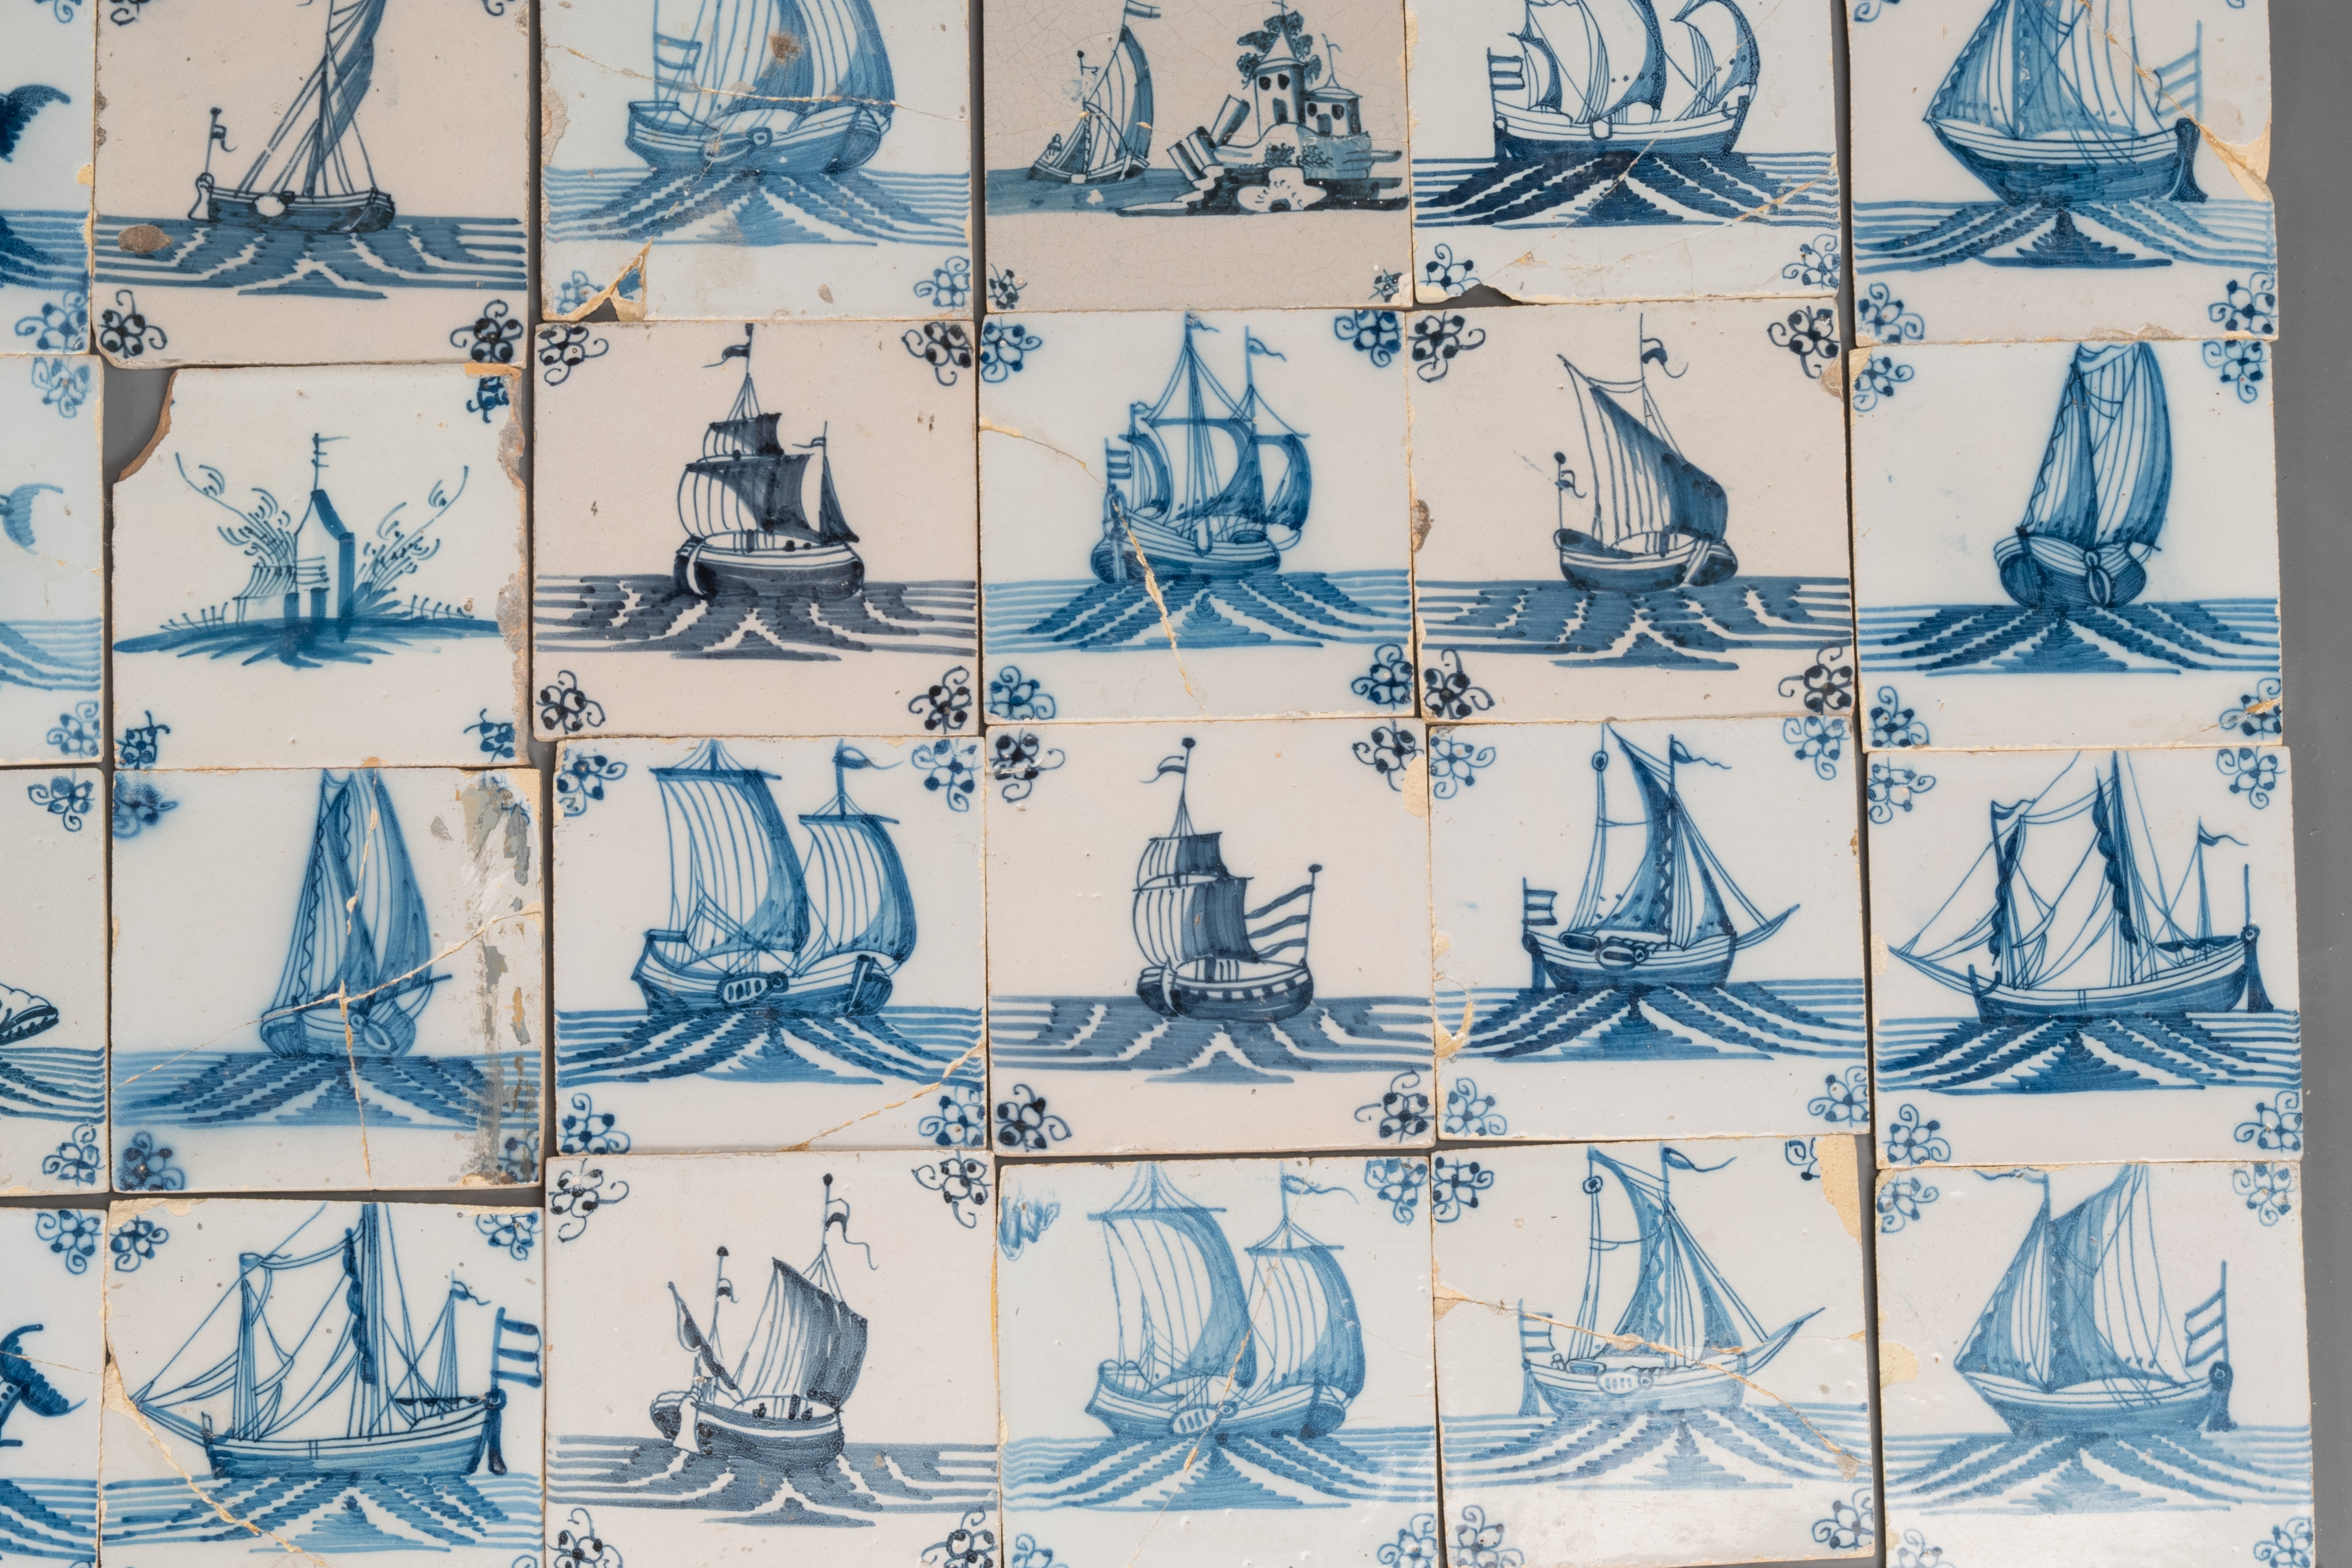 92 blue and white Dutch Delft tiles with sea monsters and ships, 18th C. - Image 11 of 16